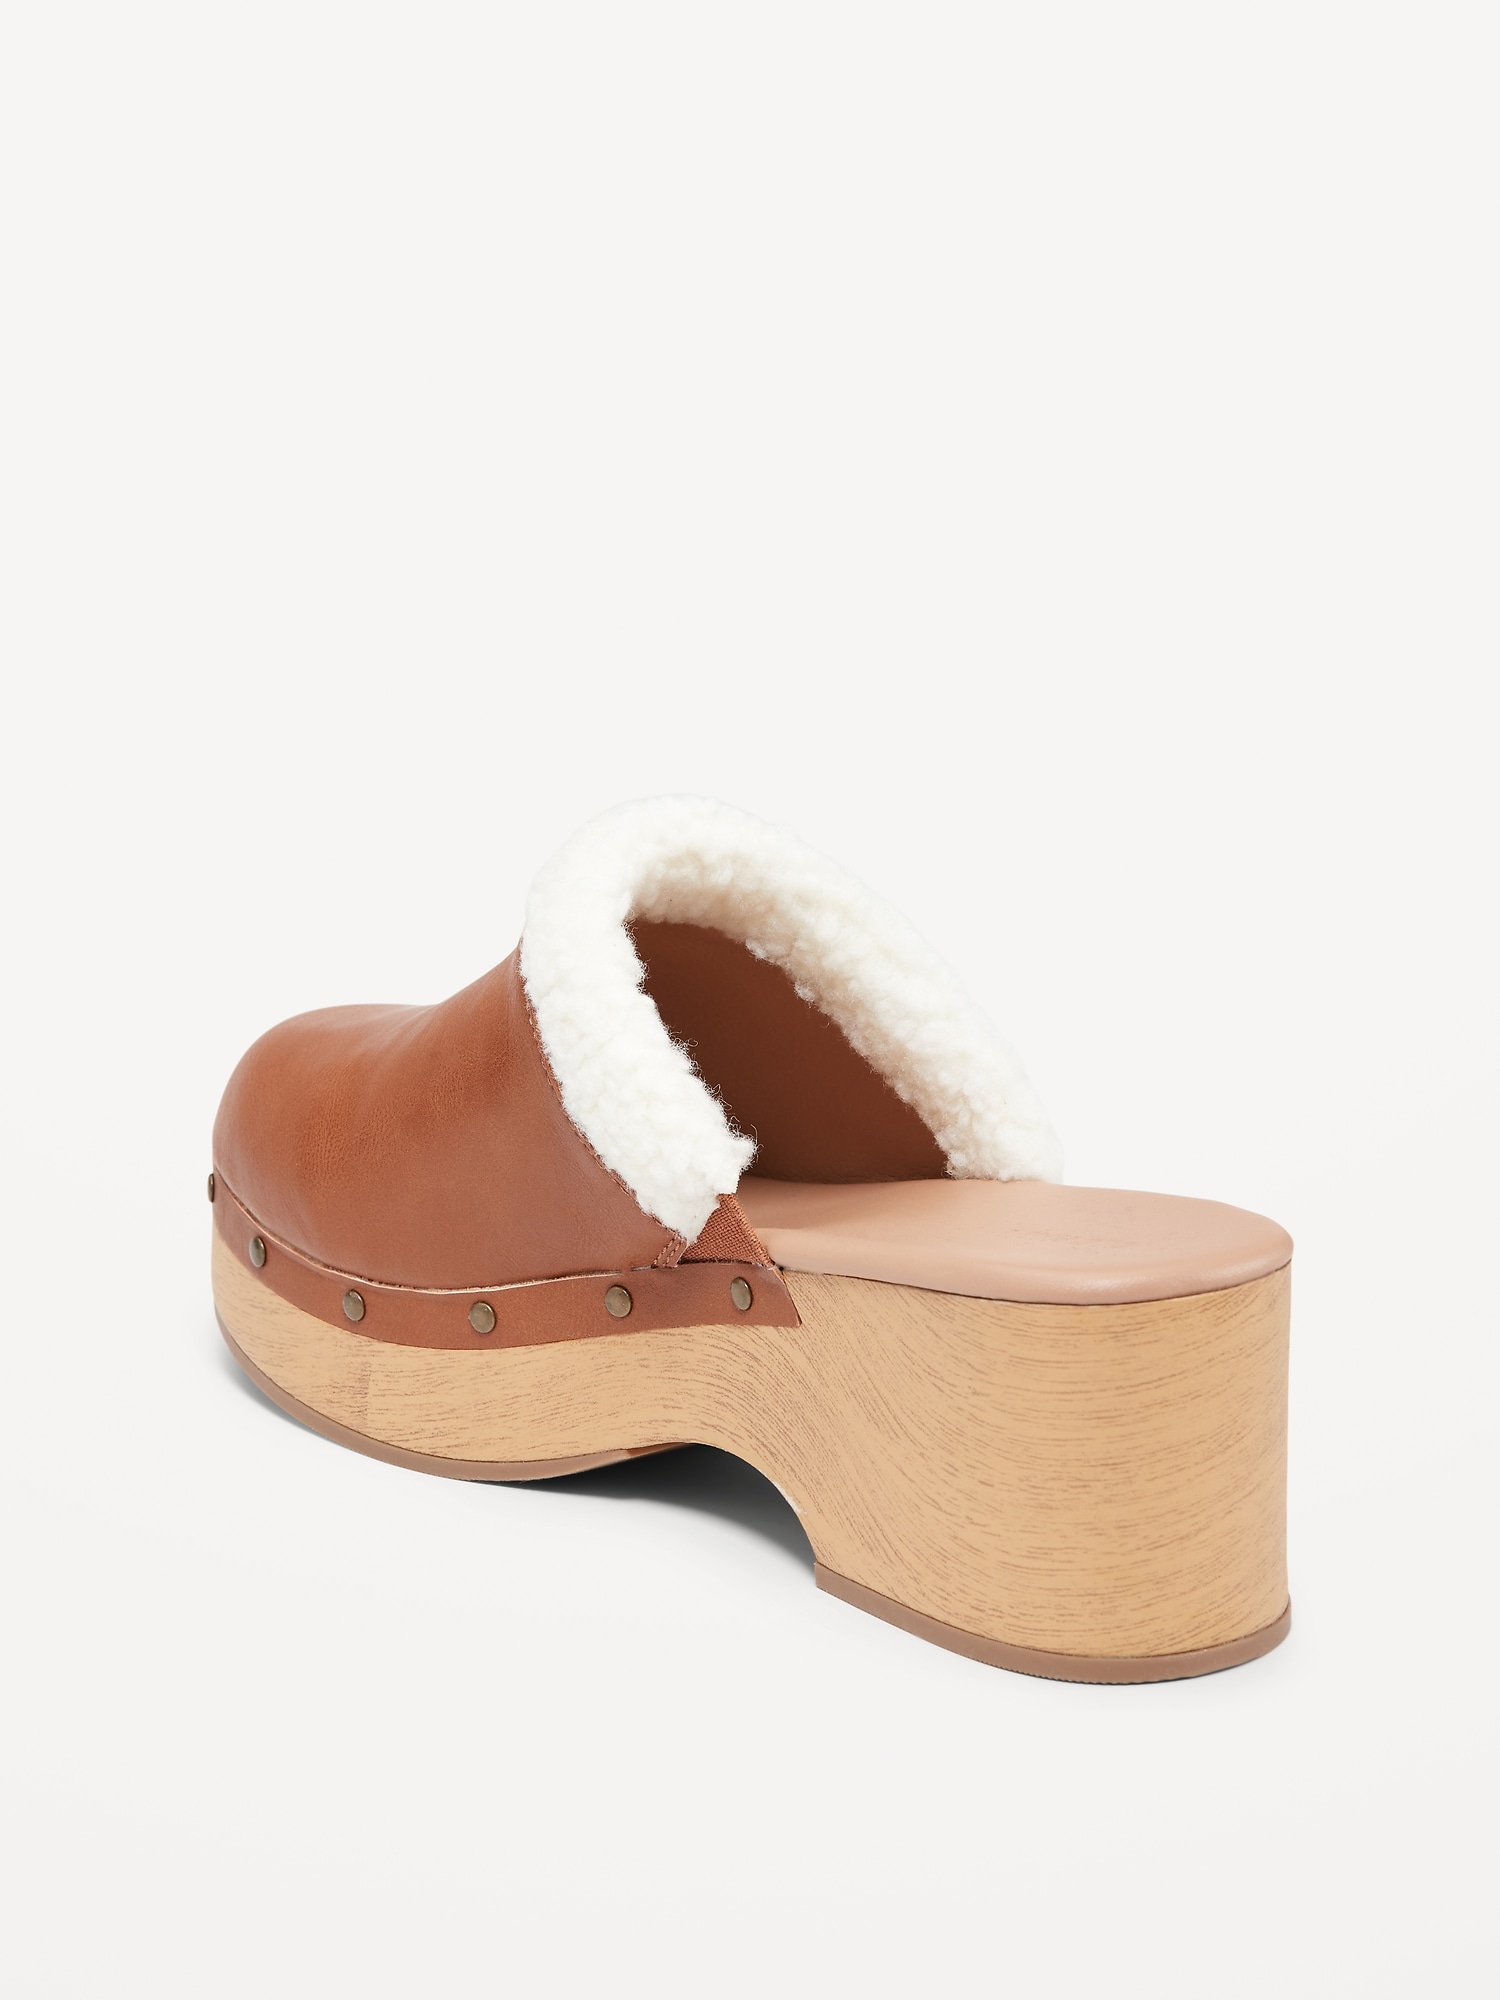 Old Navy Women's Faux-Leather Sherpa-Lined Clogs - - Size 10